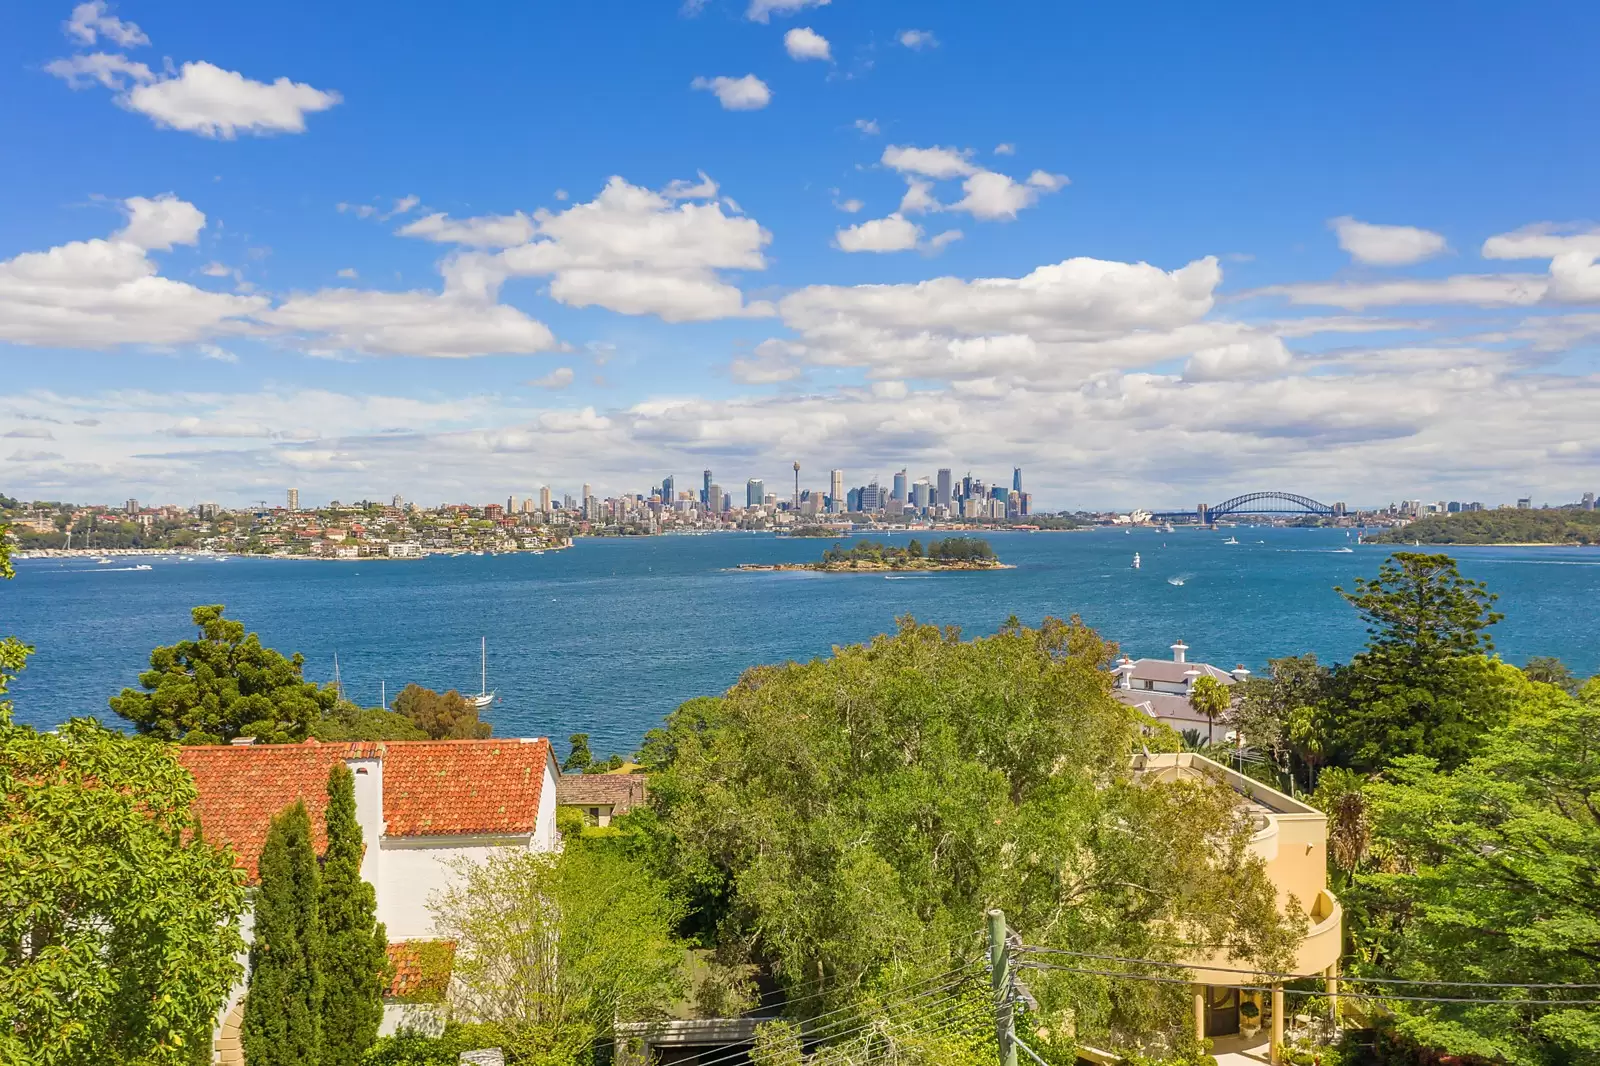 Photo #3: 41 Vaucluse Road, Vaucluse - Sold by Sydney Sotheby's International Realty